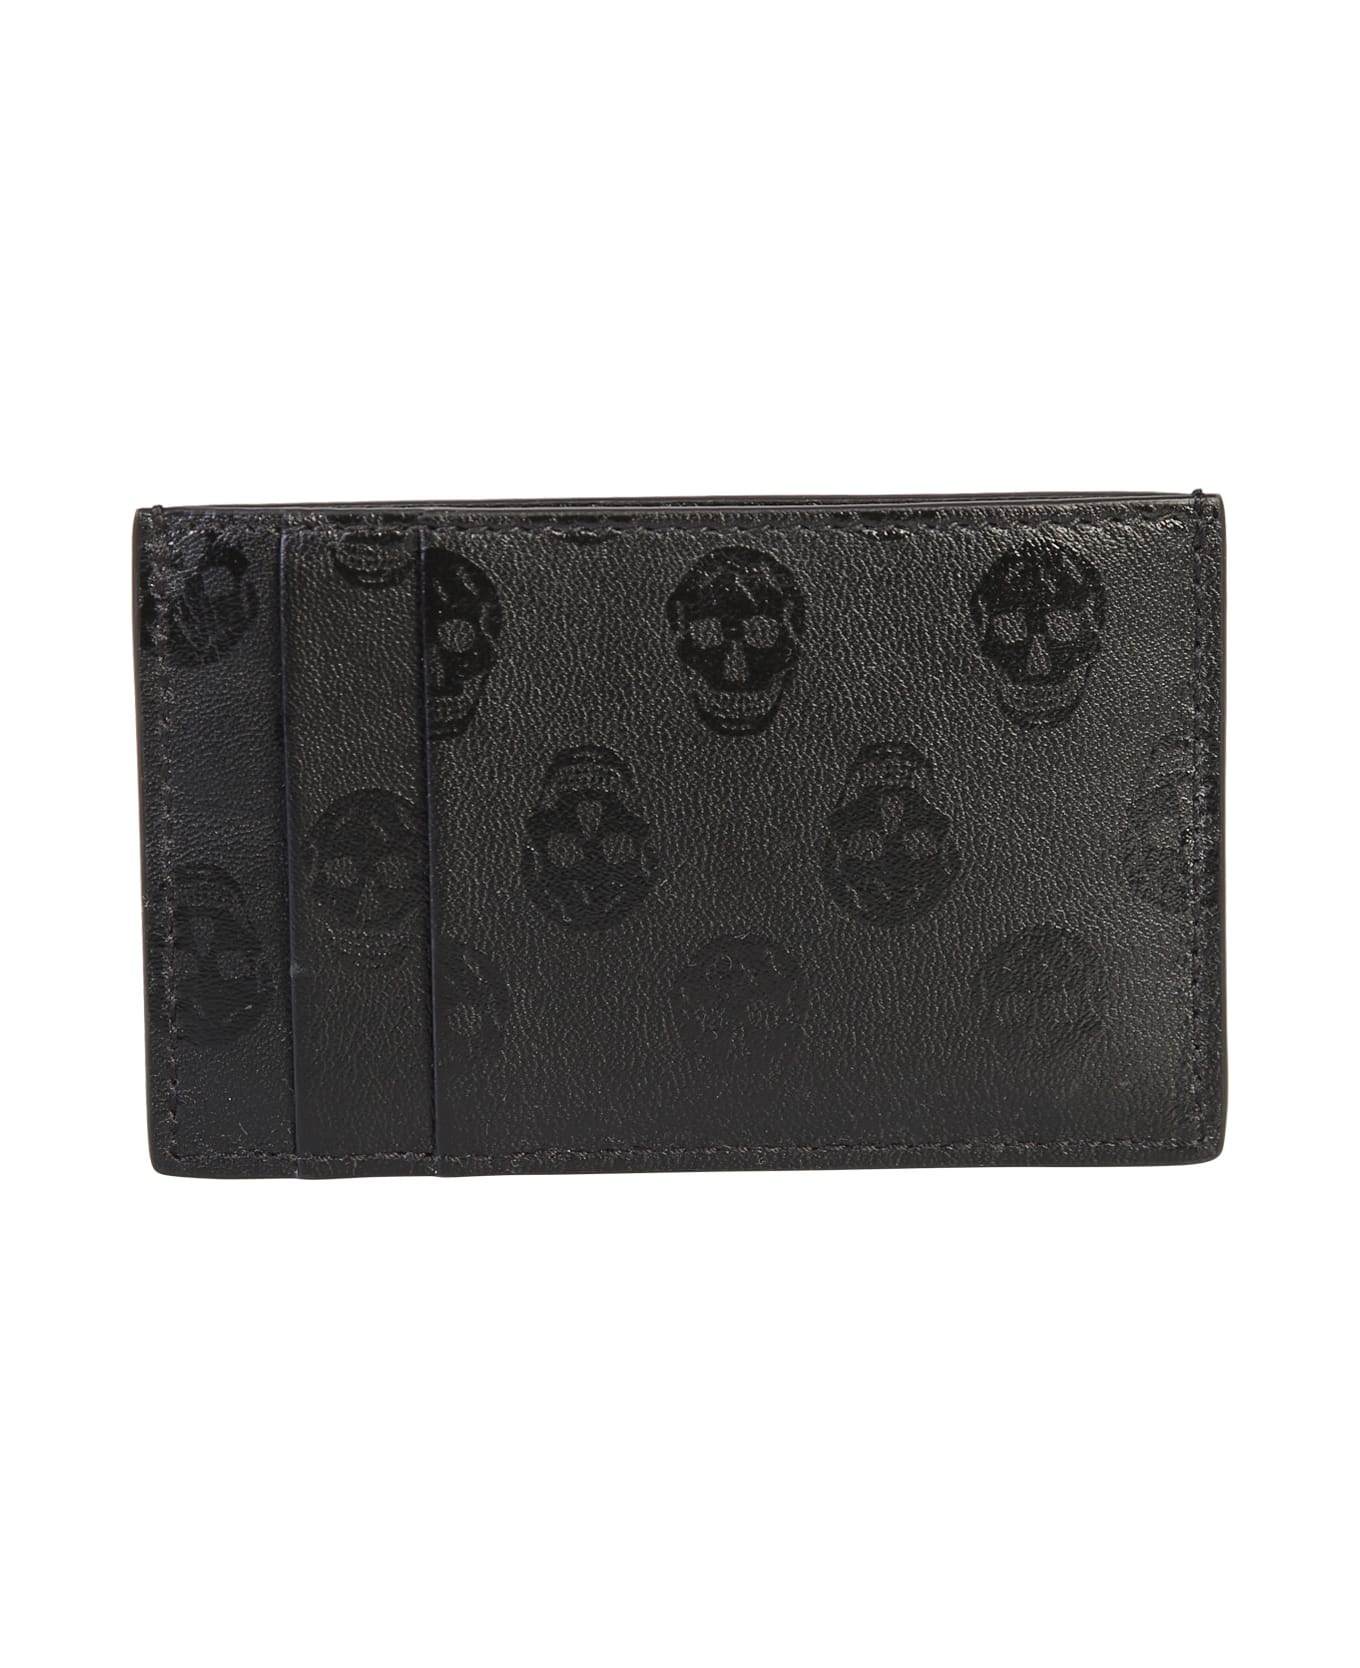 Leather Card Holder With Iconic Biker Skull Print - 2